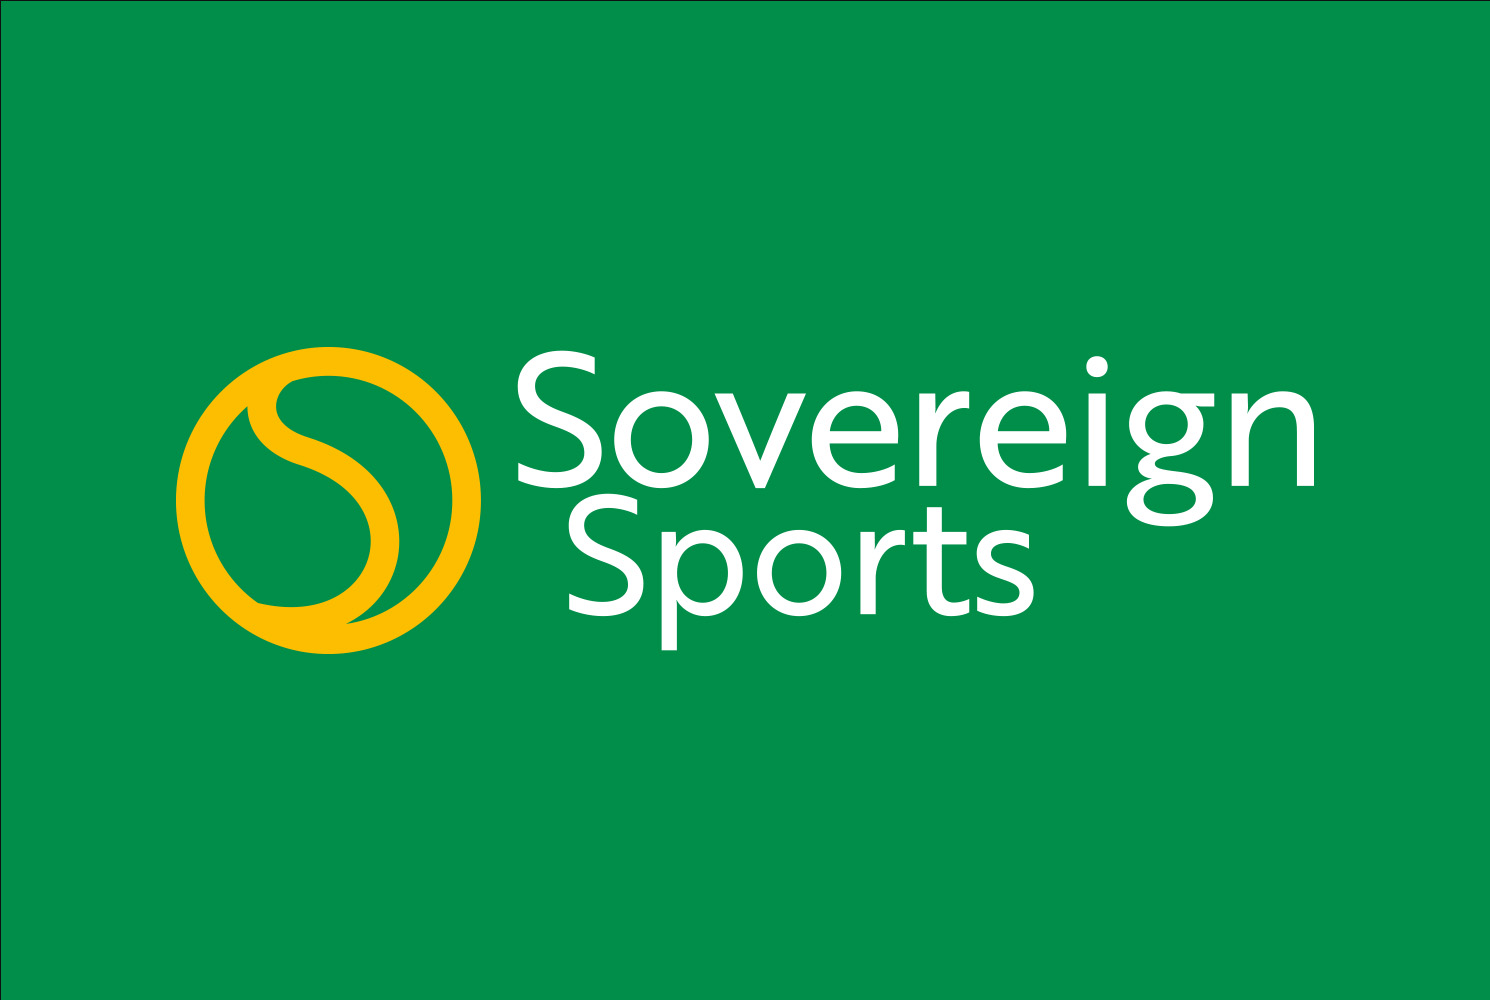 Sovereign Sports Logo on Green Background